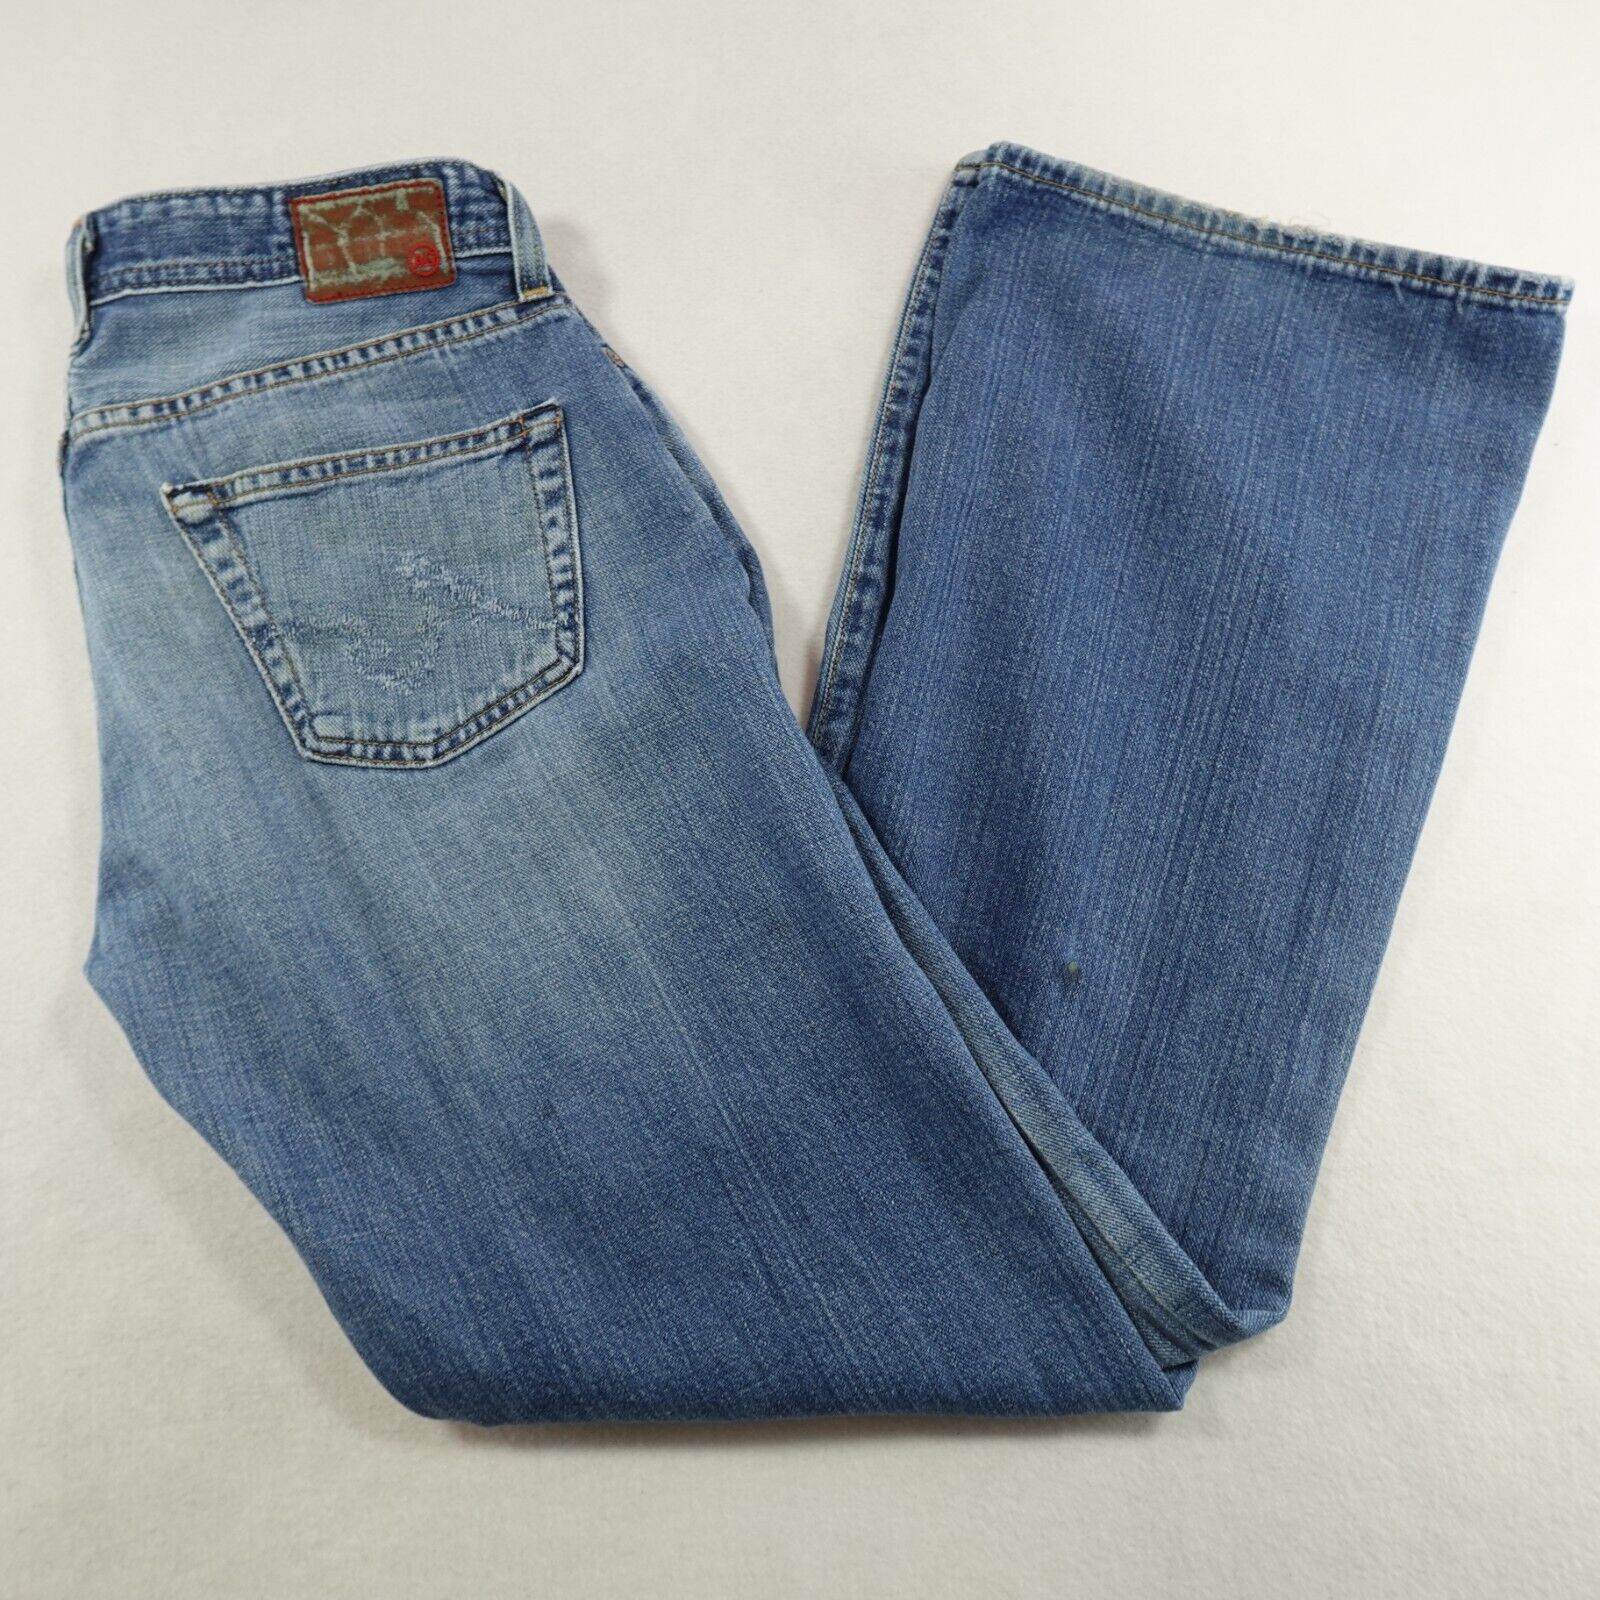 AG Adrianno Goldschmied Jeans Mens 32x32 Bootcut The Fillmore Cotton Denim Flaws